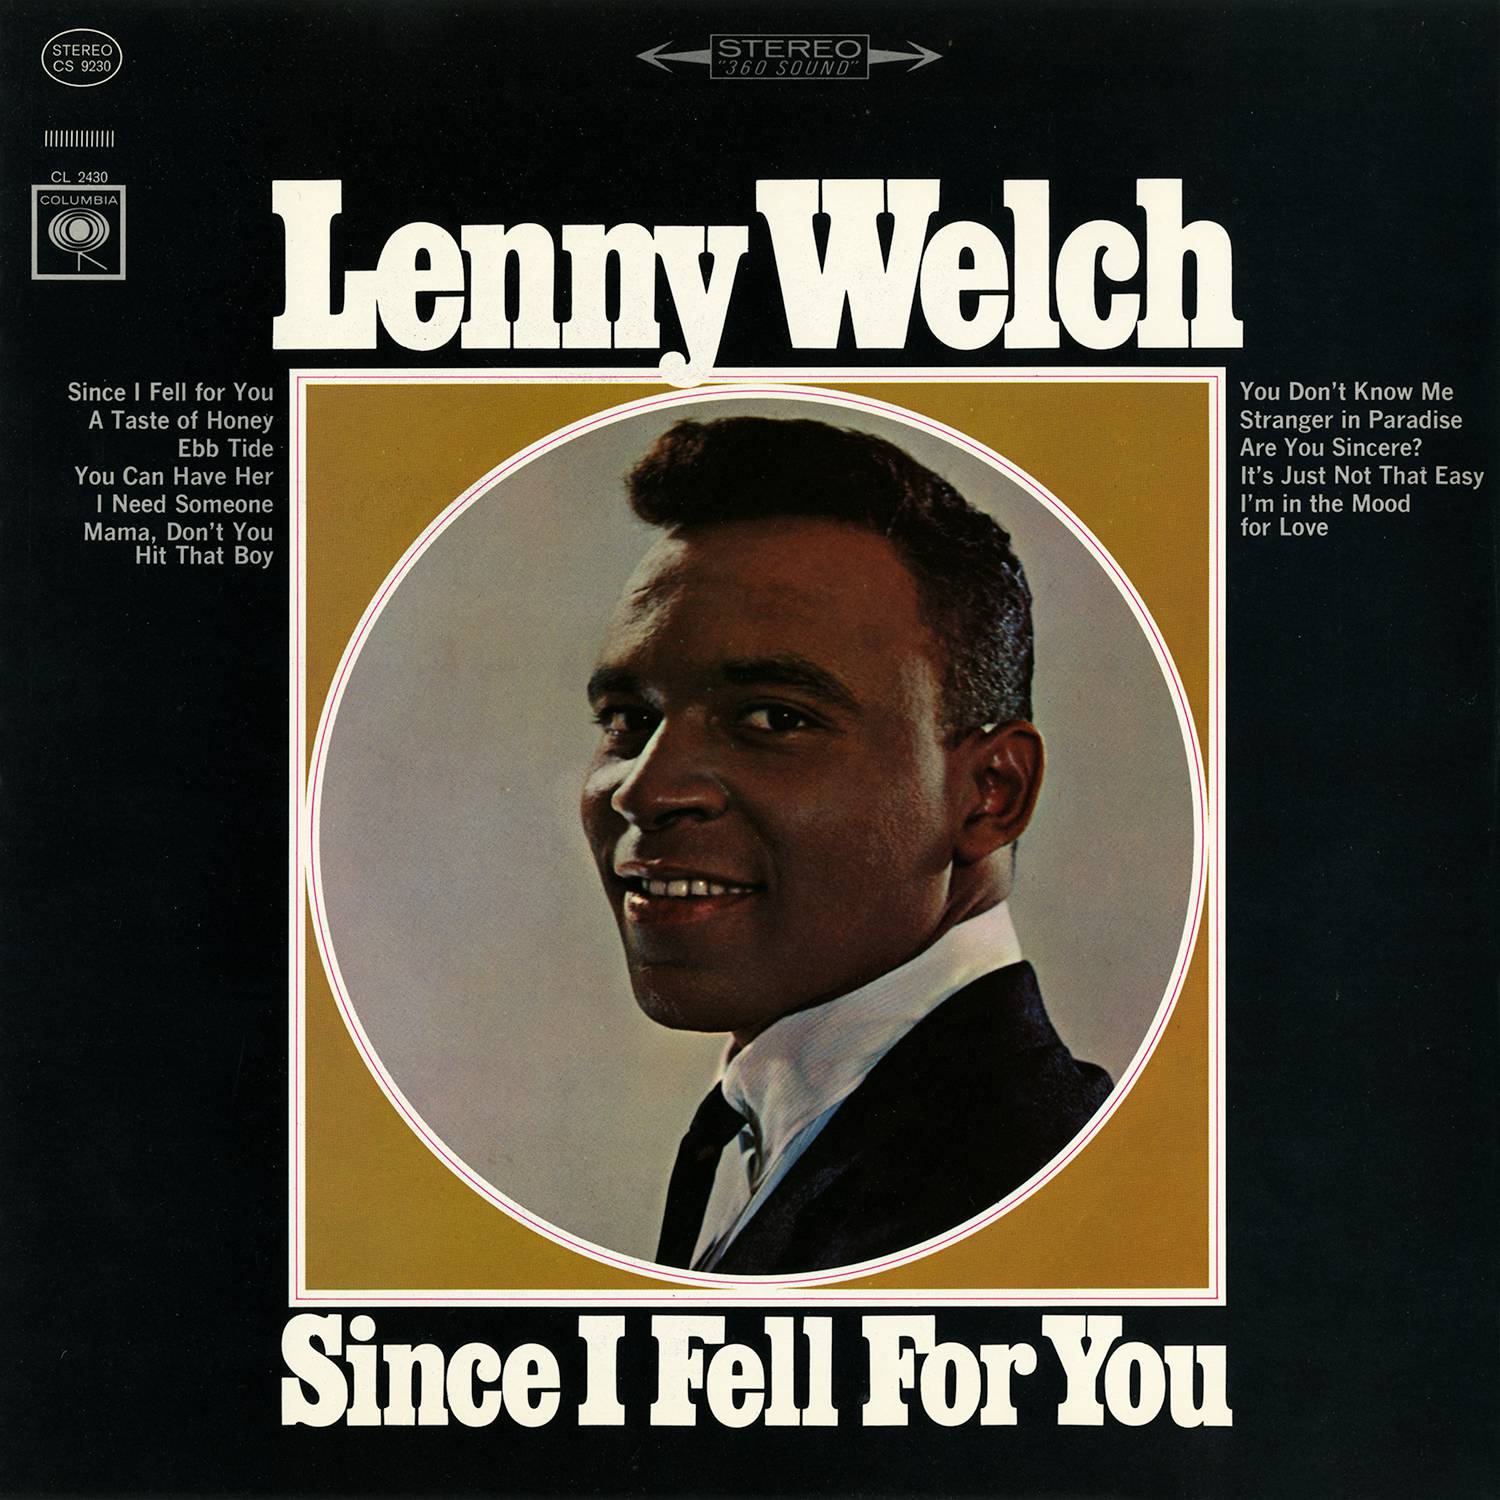 Lenny Welch – Since I Fell For You (1963/2015) [AcousticSounds FLAC 24bit/96kHz]